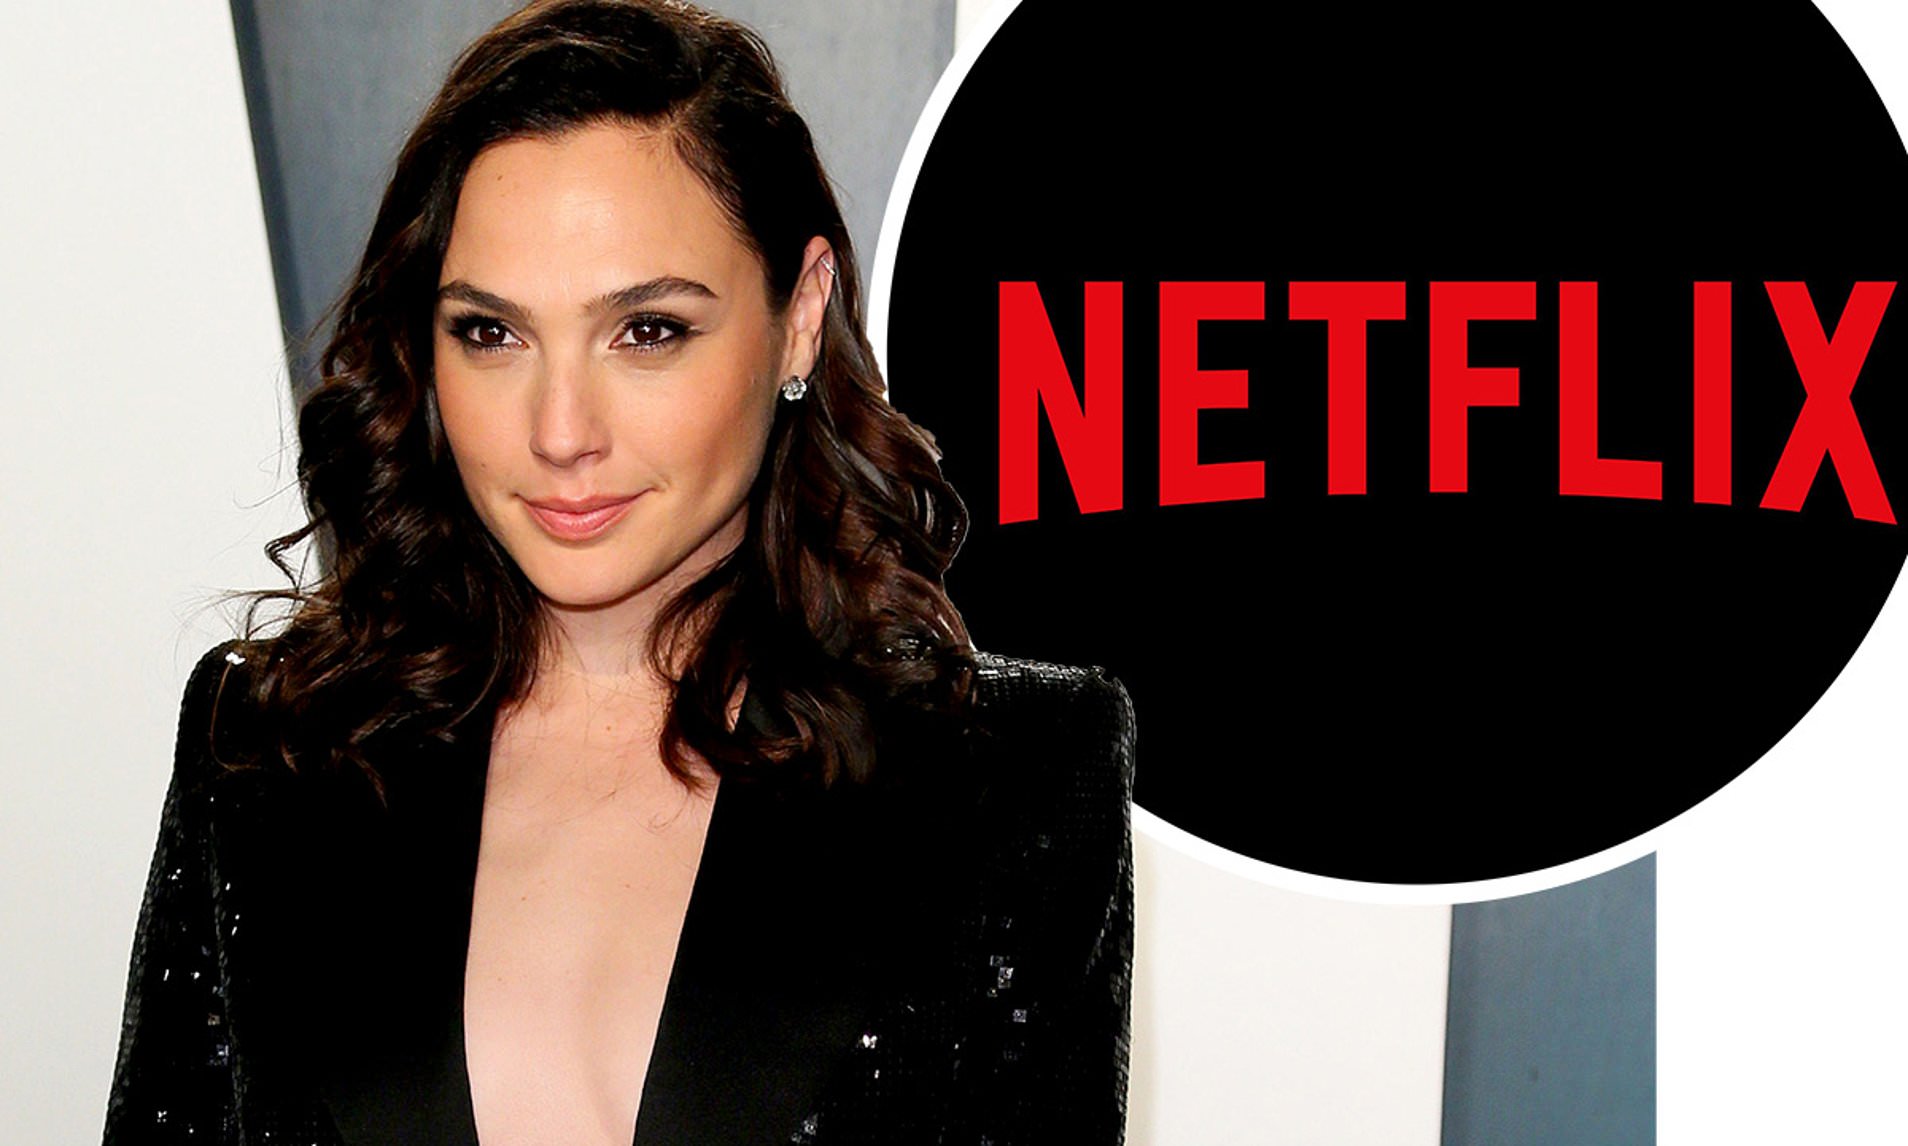 Netflix New Movie Starring Gal Gadot Heart Of Stone All We Know So Far!